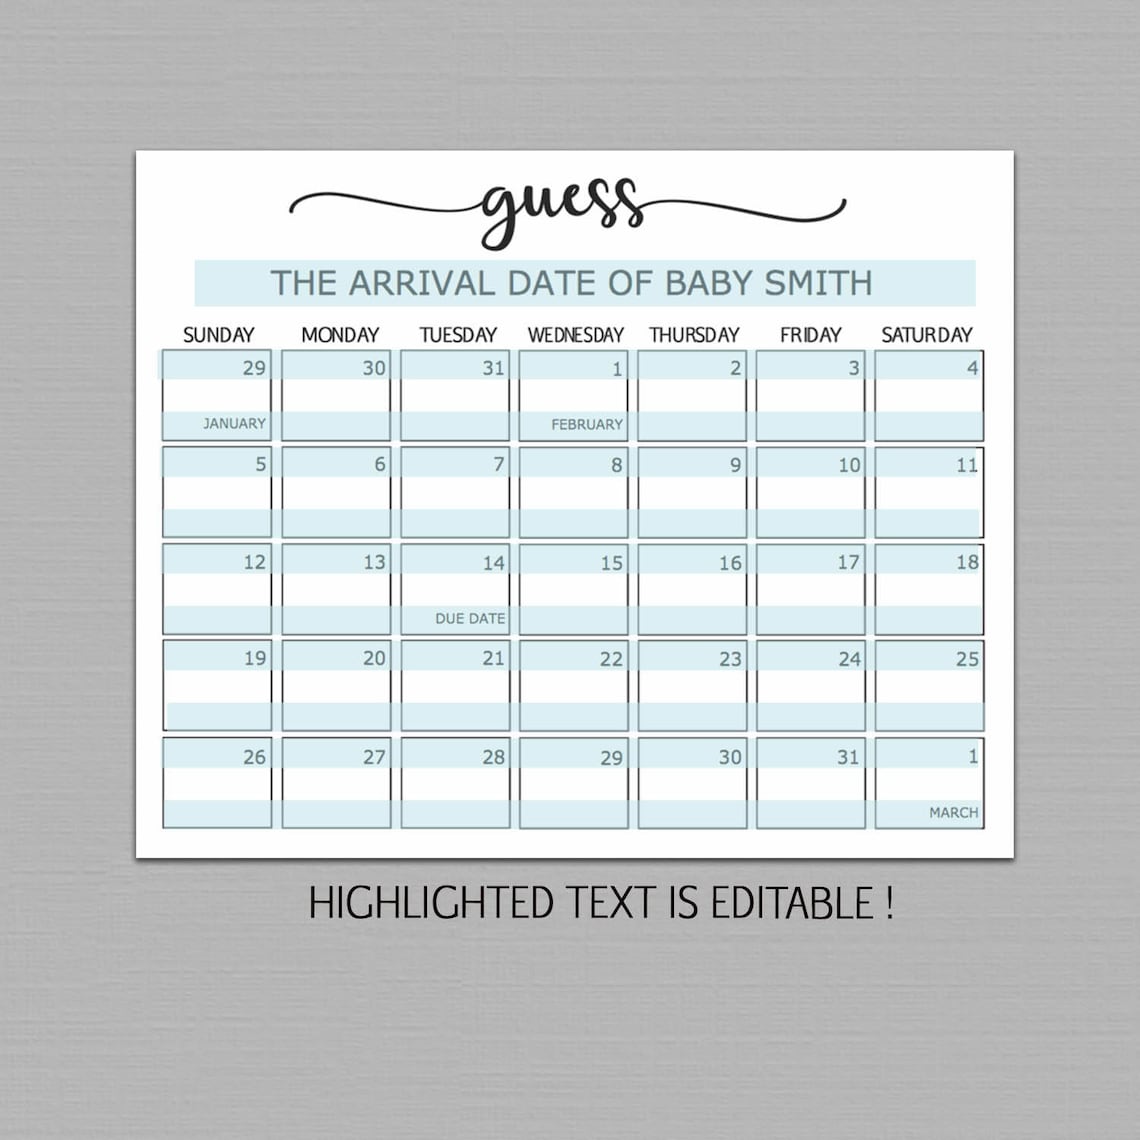 babies due date guess large print out 17